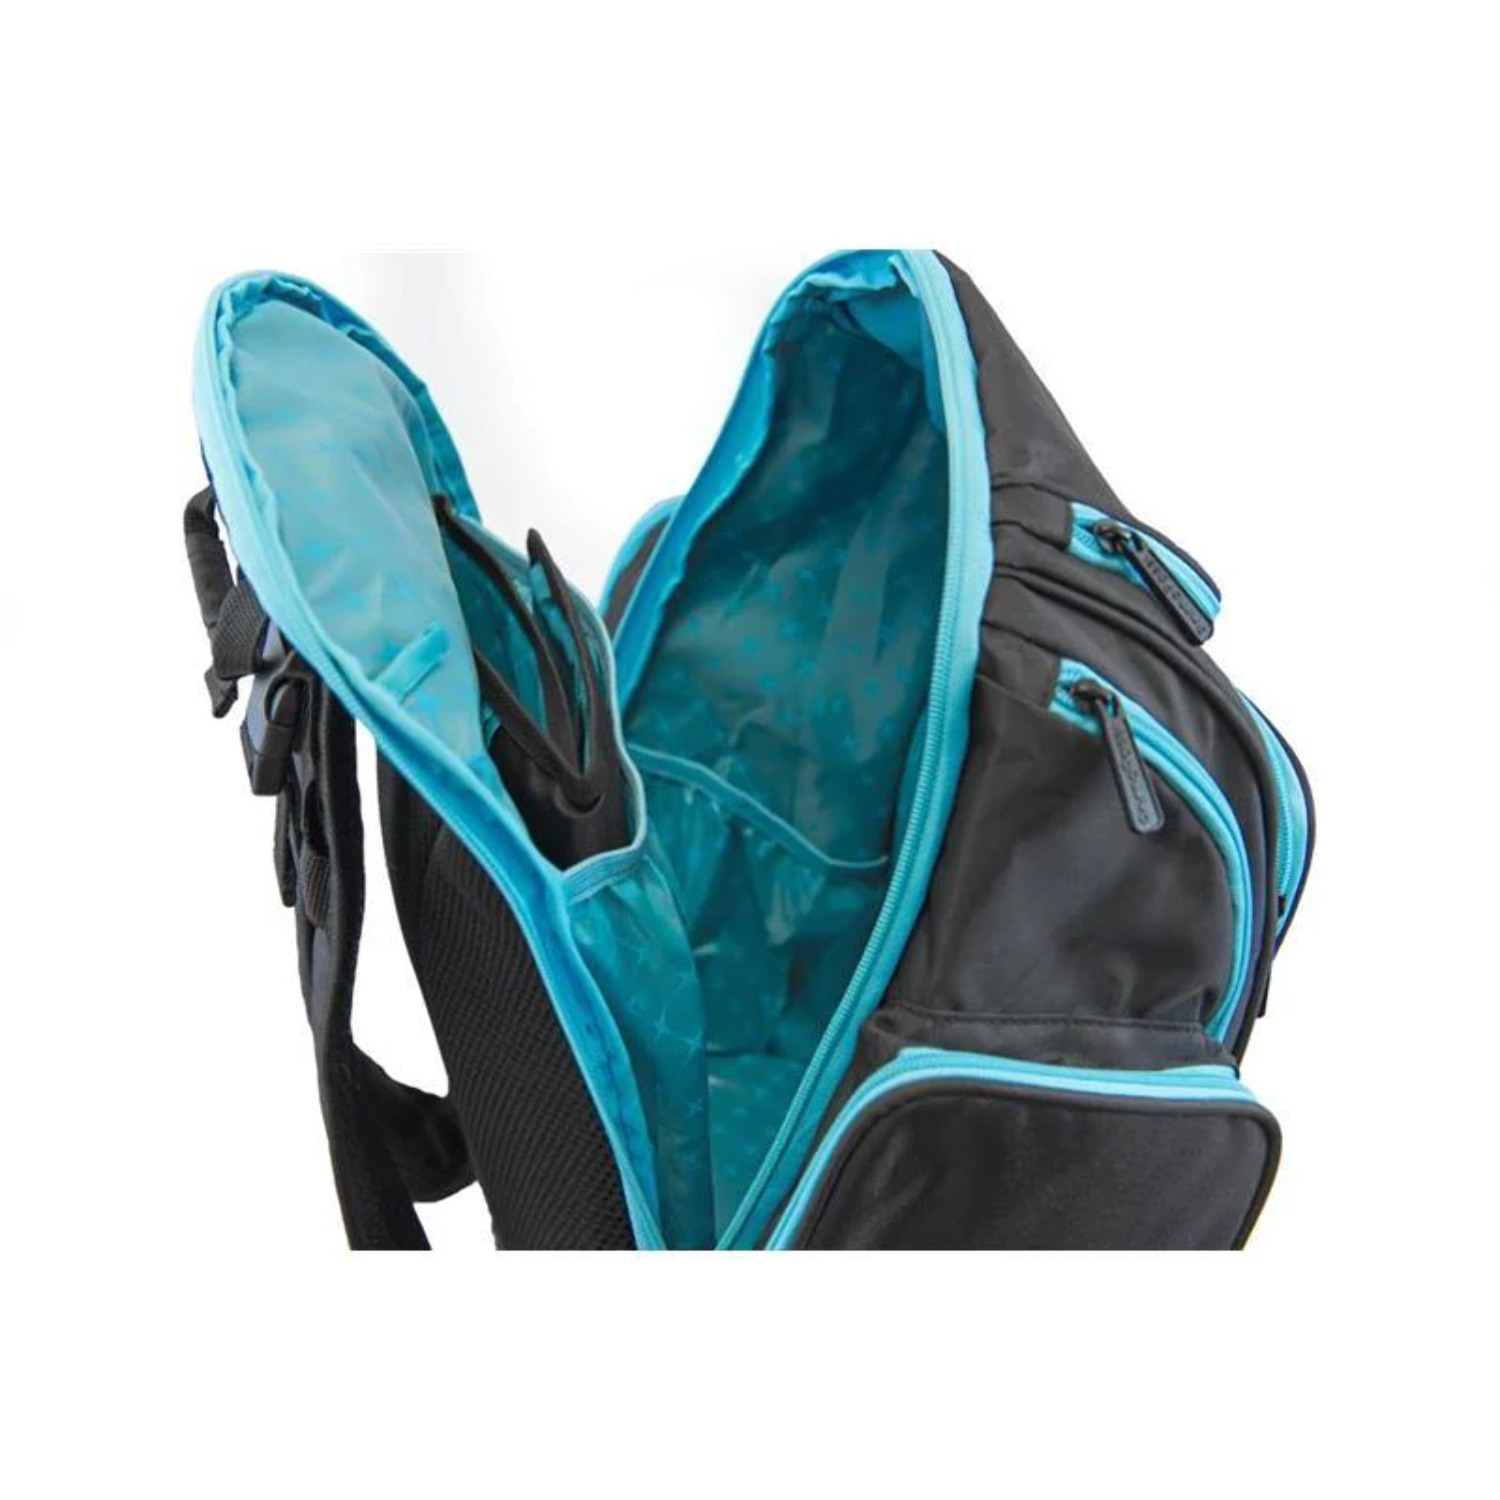 Primo Passi - Blue Backpack Diaper Bag - image 3 of 9